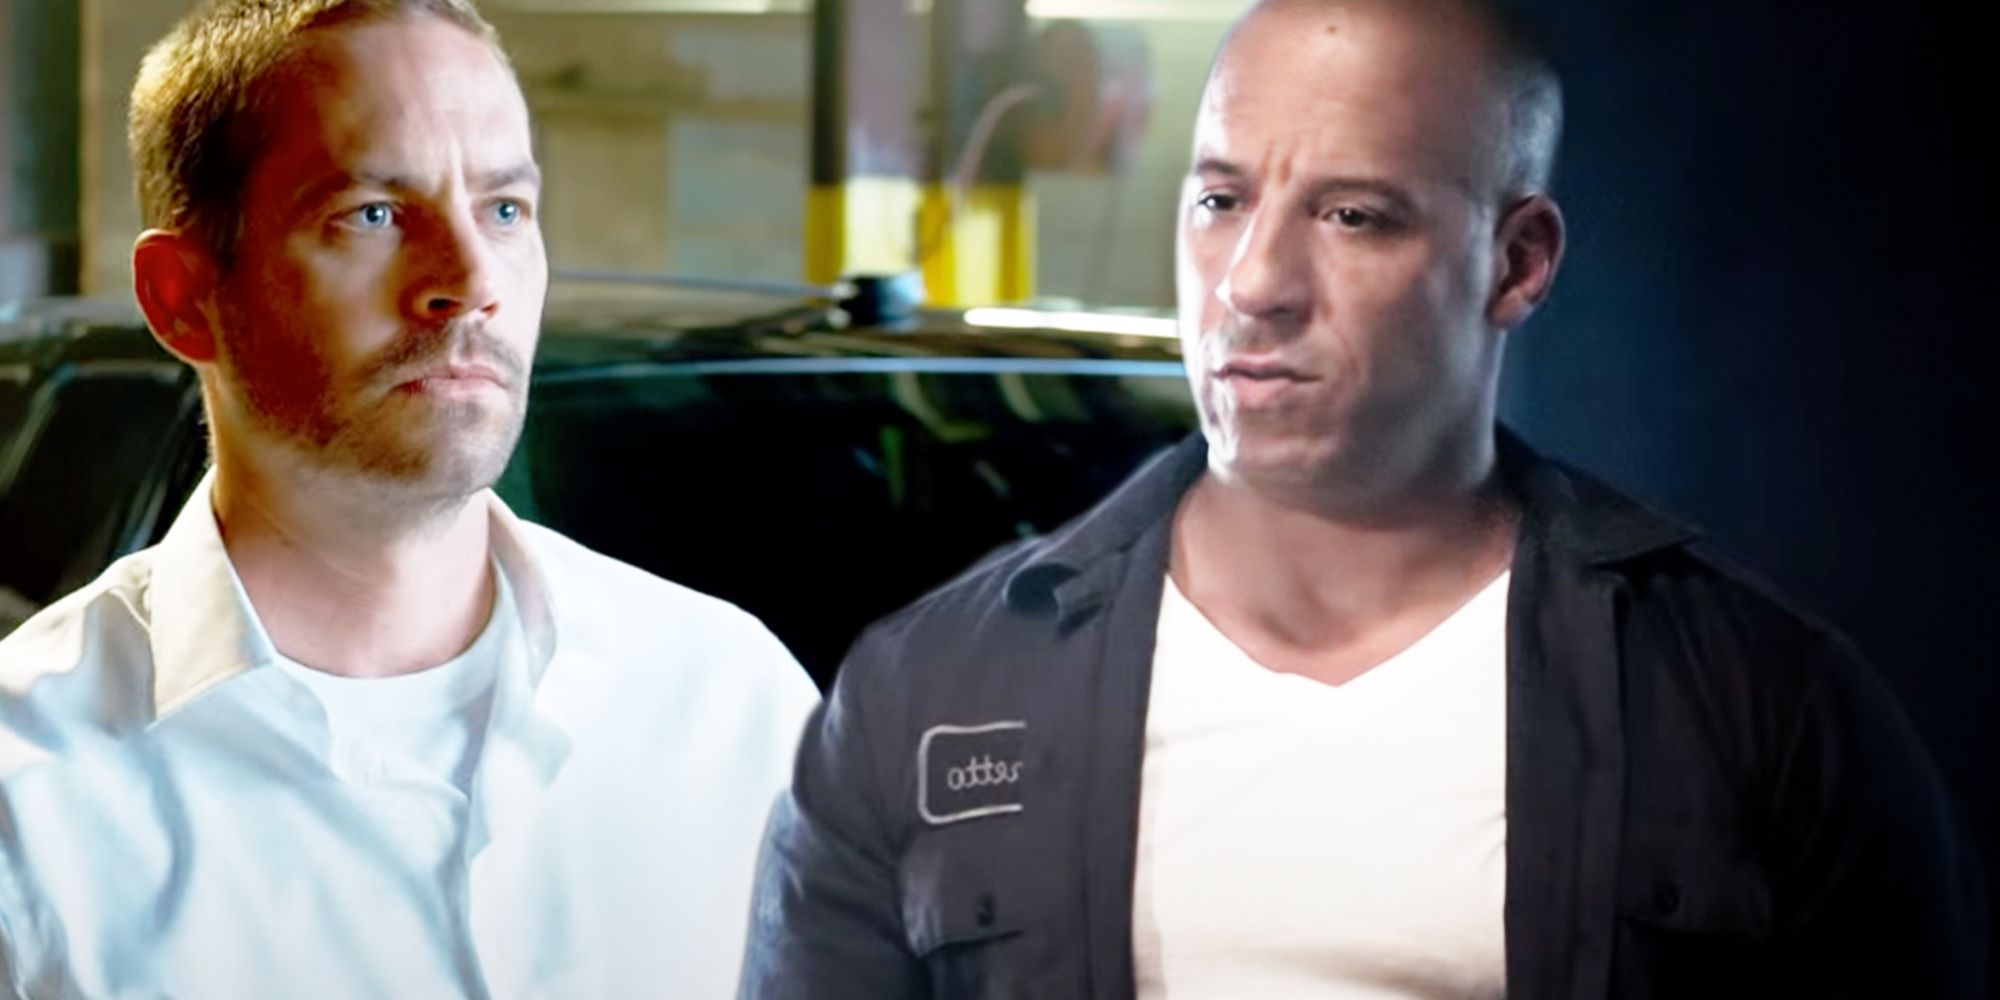 Paul Walker as Brian O'Conner and Vin Diesel as Dominic Toretto in the Fast Saga